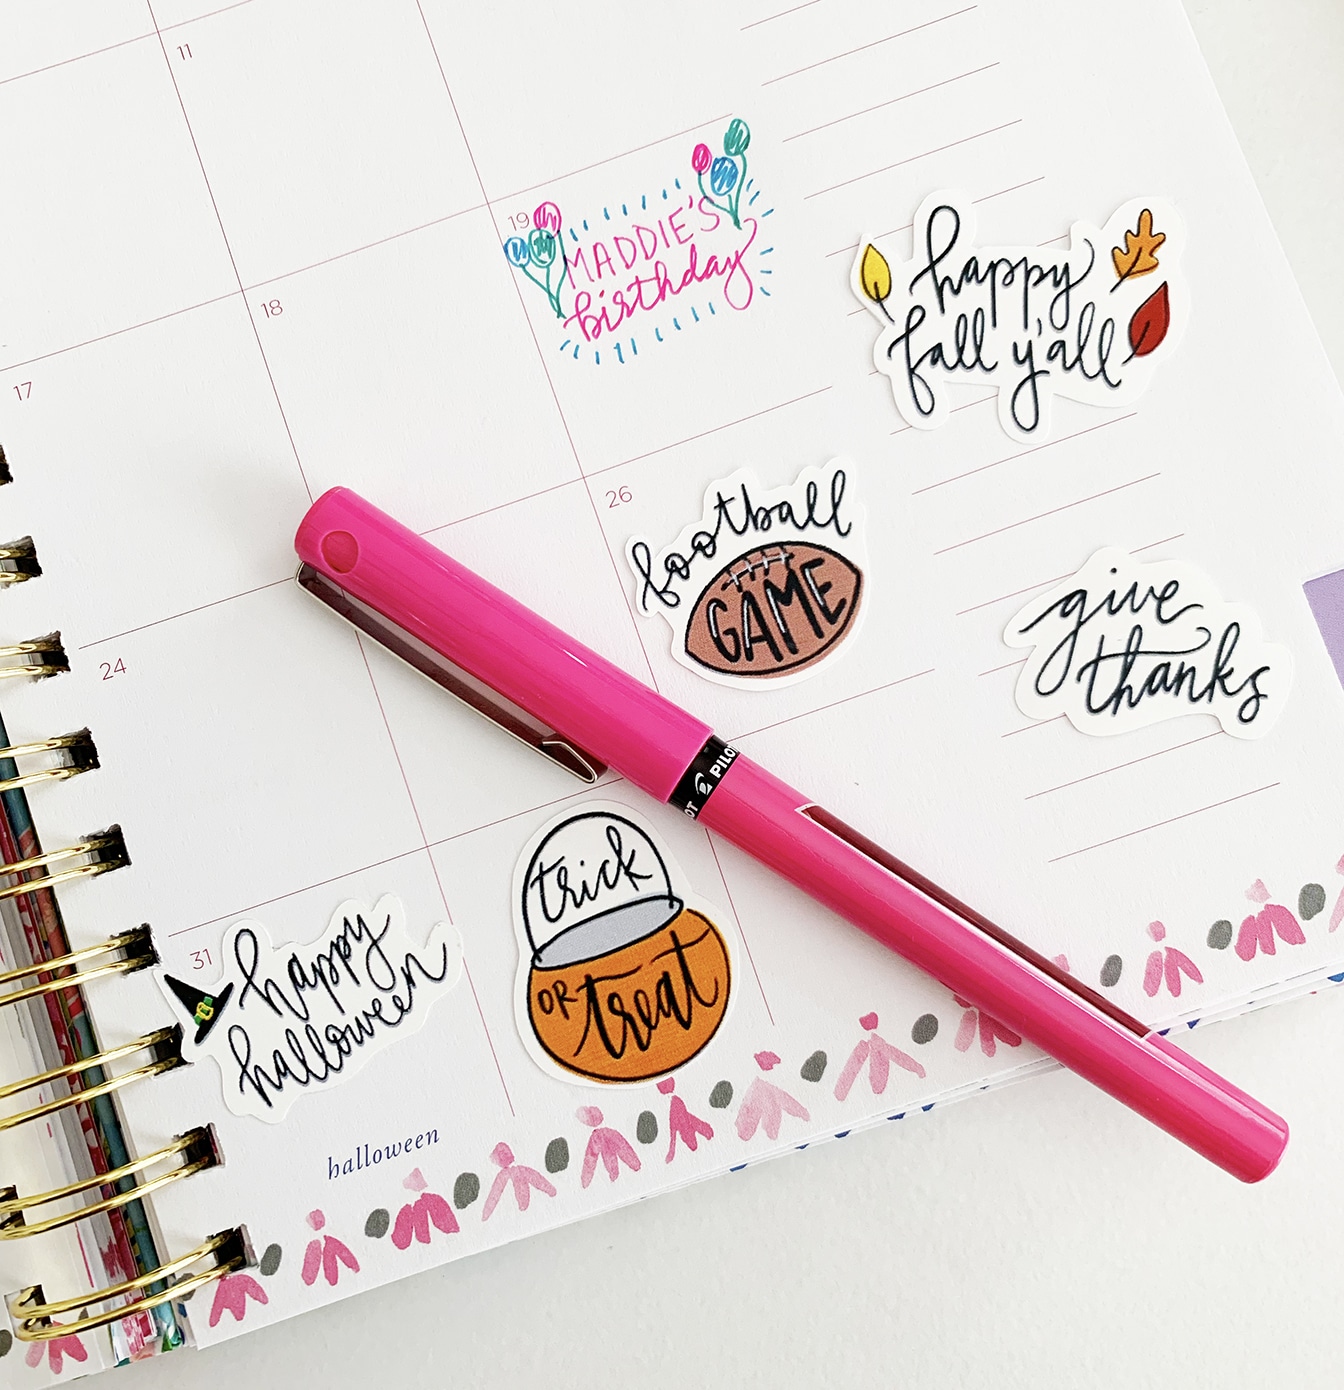 Free Planner Stickers Printable for Fall by Pineapple Paper Co.